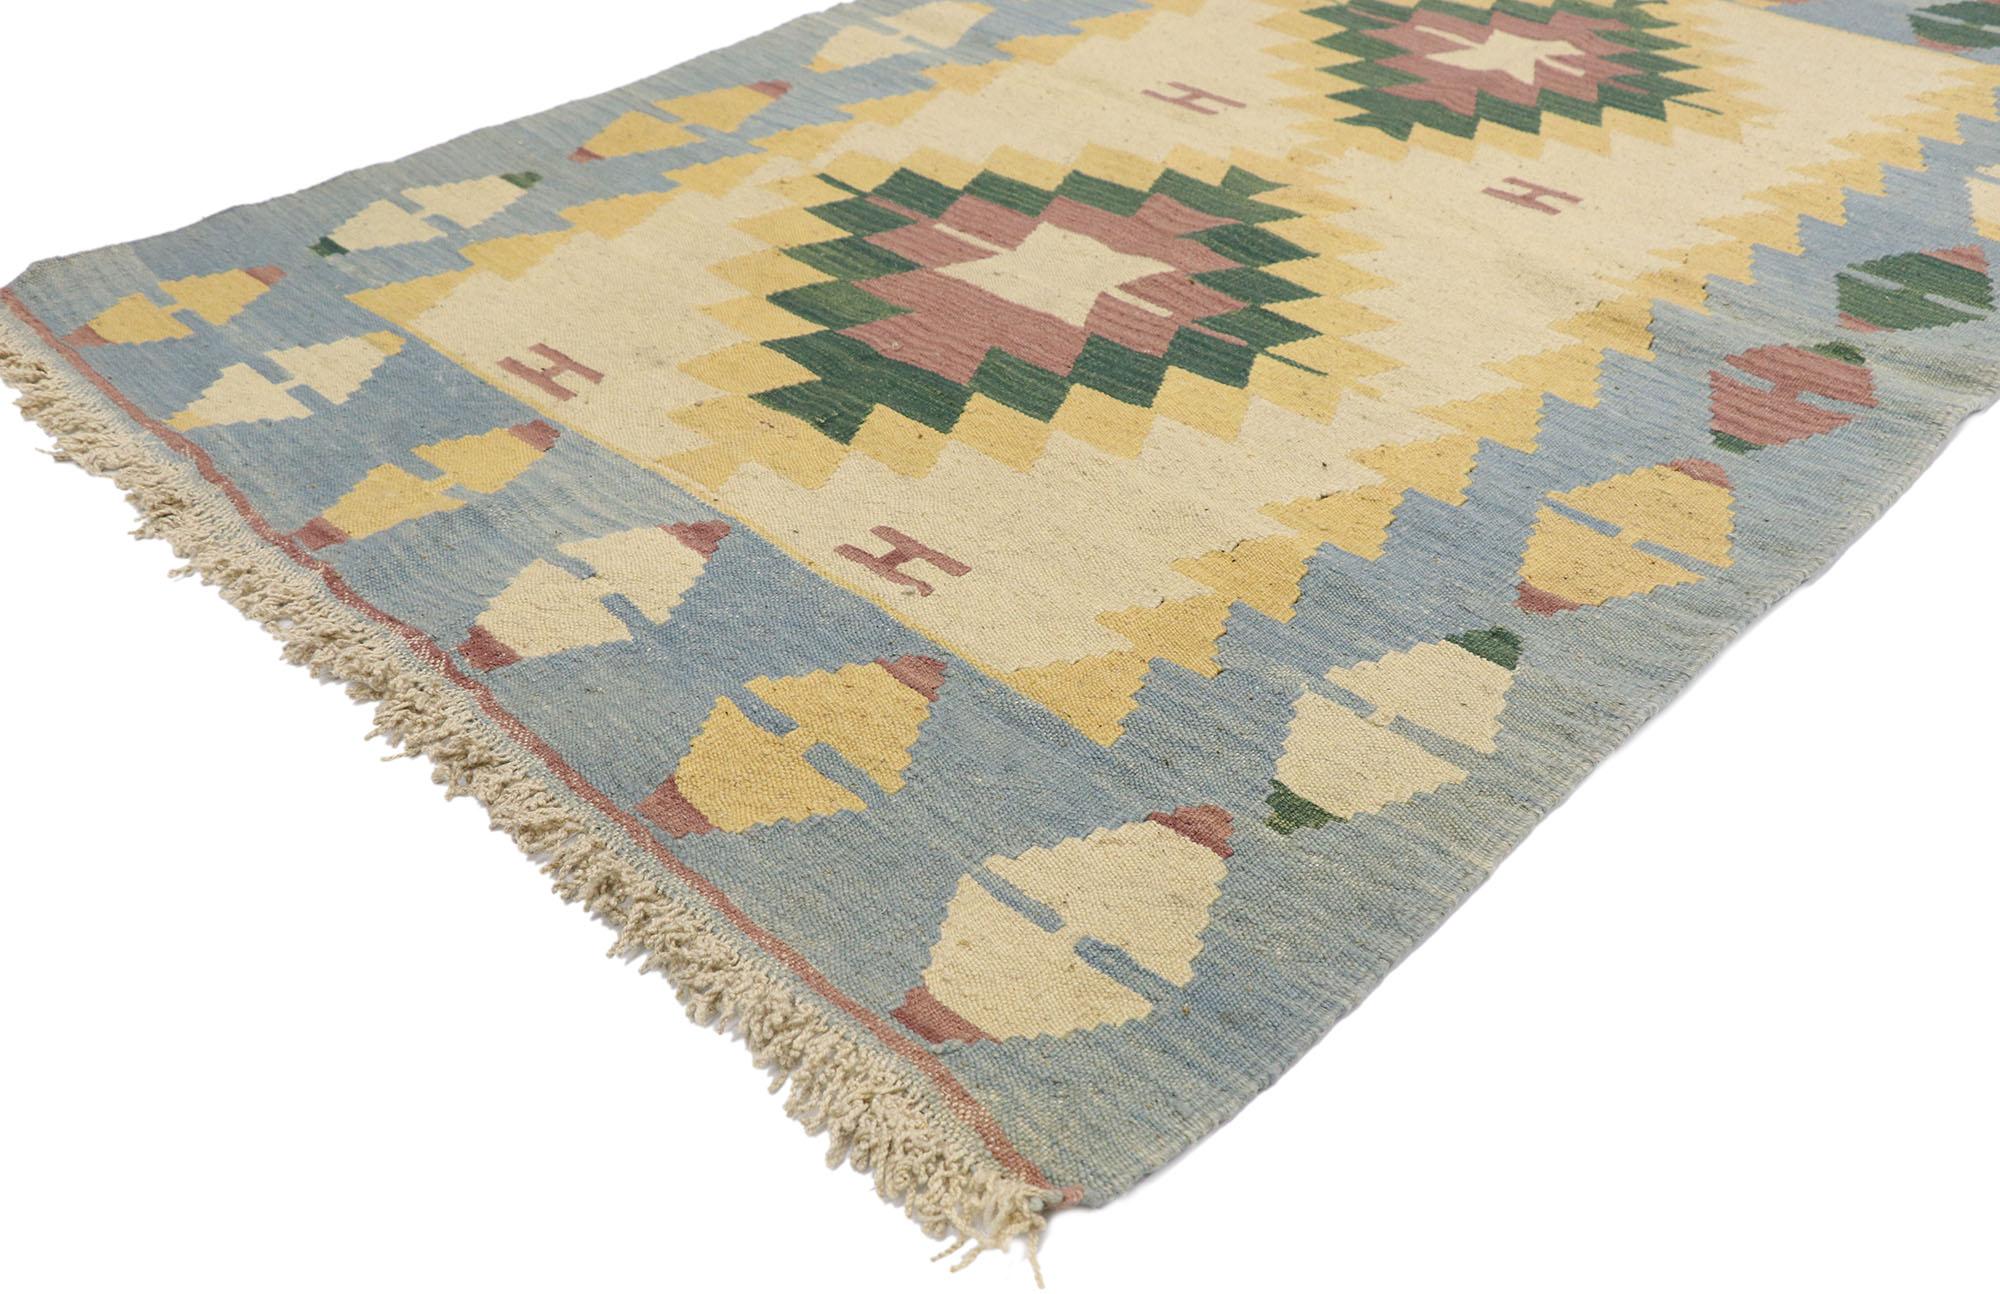 77810 vintage Persian Shiraz Kilim rug with Boho Chic Tribal style 03'10 x 05'09. Full of tiny details and a bold expressive design combined with vibrant colors and tribal style, this hand-woven wool vintage Persian Shiraz kilim rug is a captivating